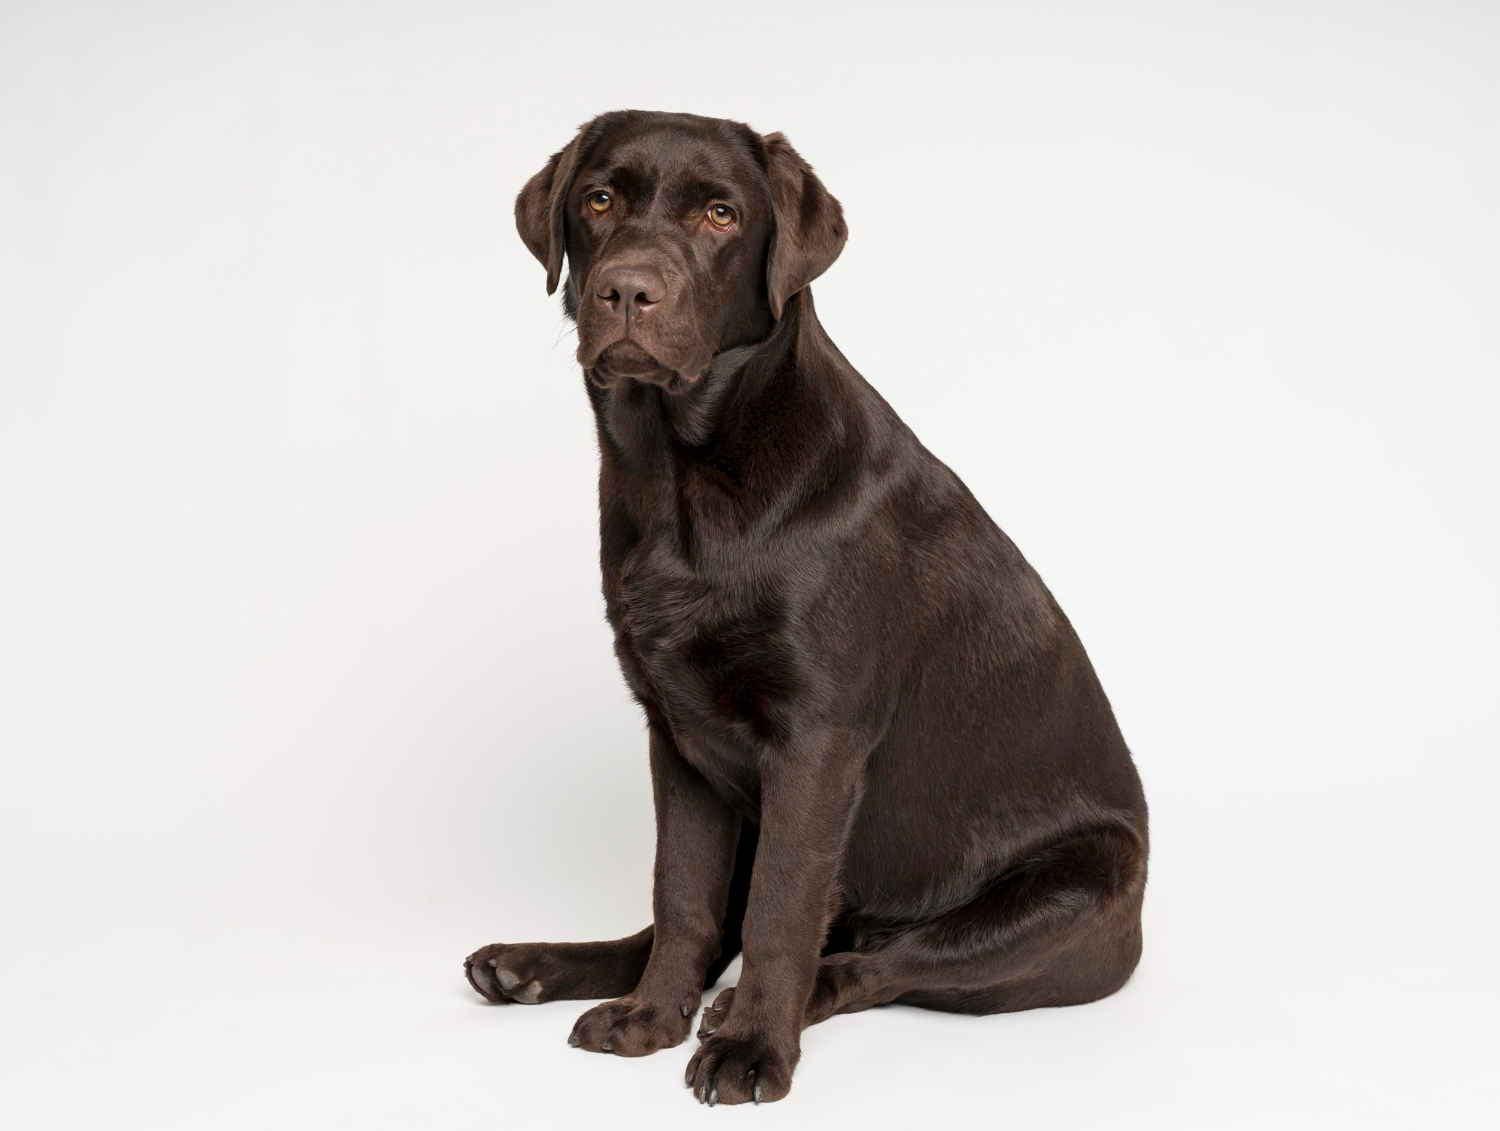 5 Tips to Safely and Respectfully Interact with Your Labrador Retriever: A Guide for Parents